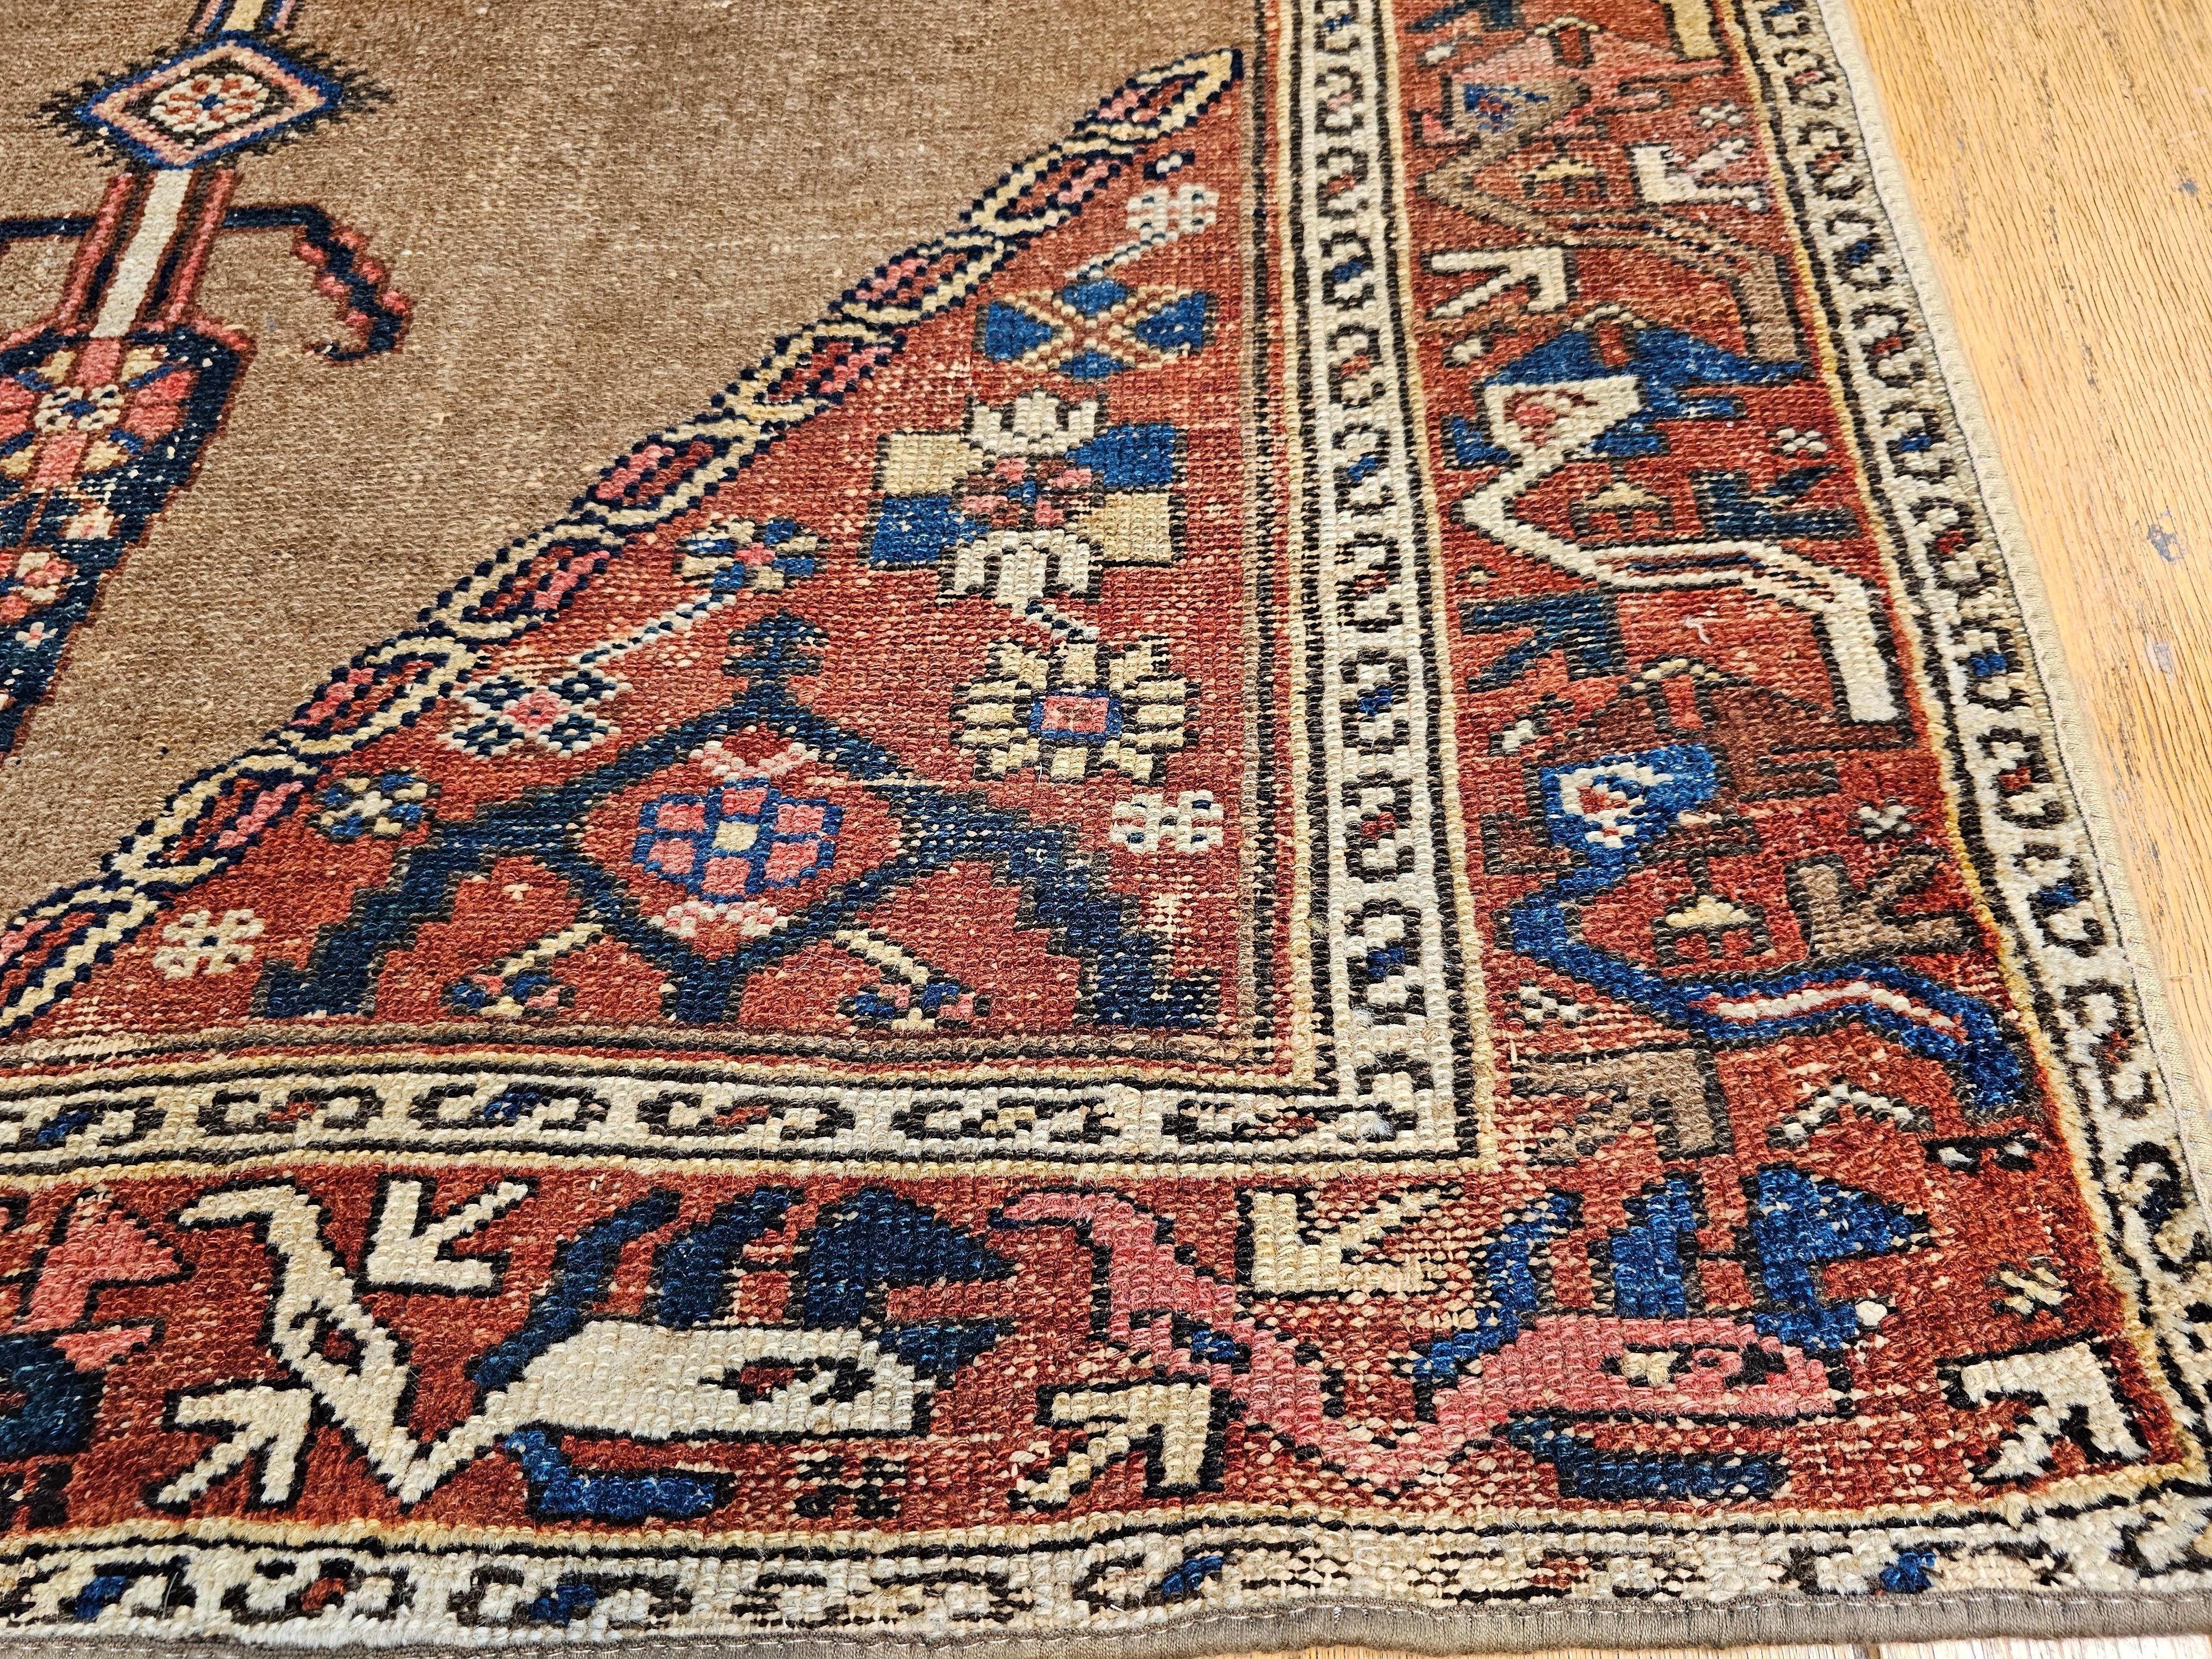 Vintage Persian Camelhair Malayer Area Rug in Camel, Navy, Ivory, Rust Red, Blue For Sale 7